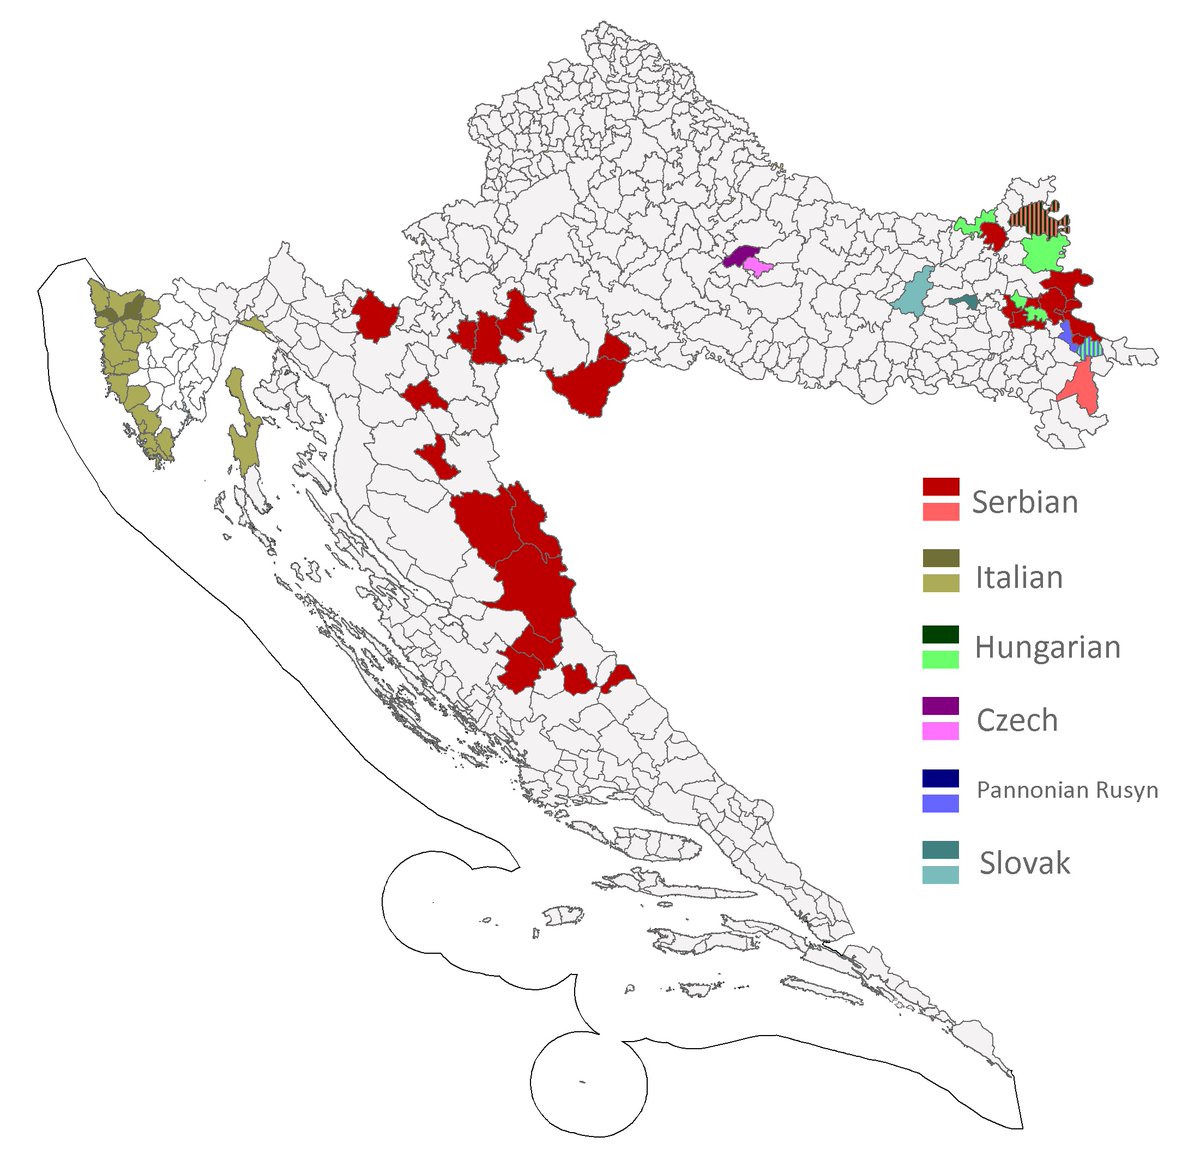 14. Back to 12. & 13., the  #genocide &  #EthnicCleansing perpetrated vs  #Serbs was not the only thing affecting the map.A process of  #Yugoslavization also occurred, turning  #Serbian speakers into  #SerboCroatian ones, those now turning as  #Croatian ones.That's  #Croatianization.